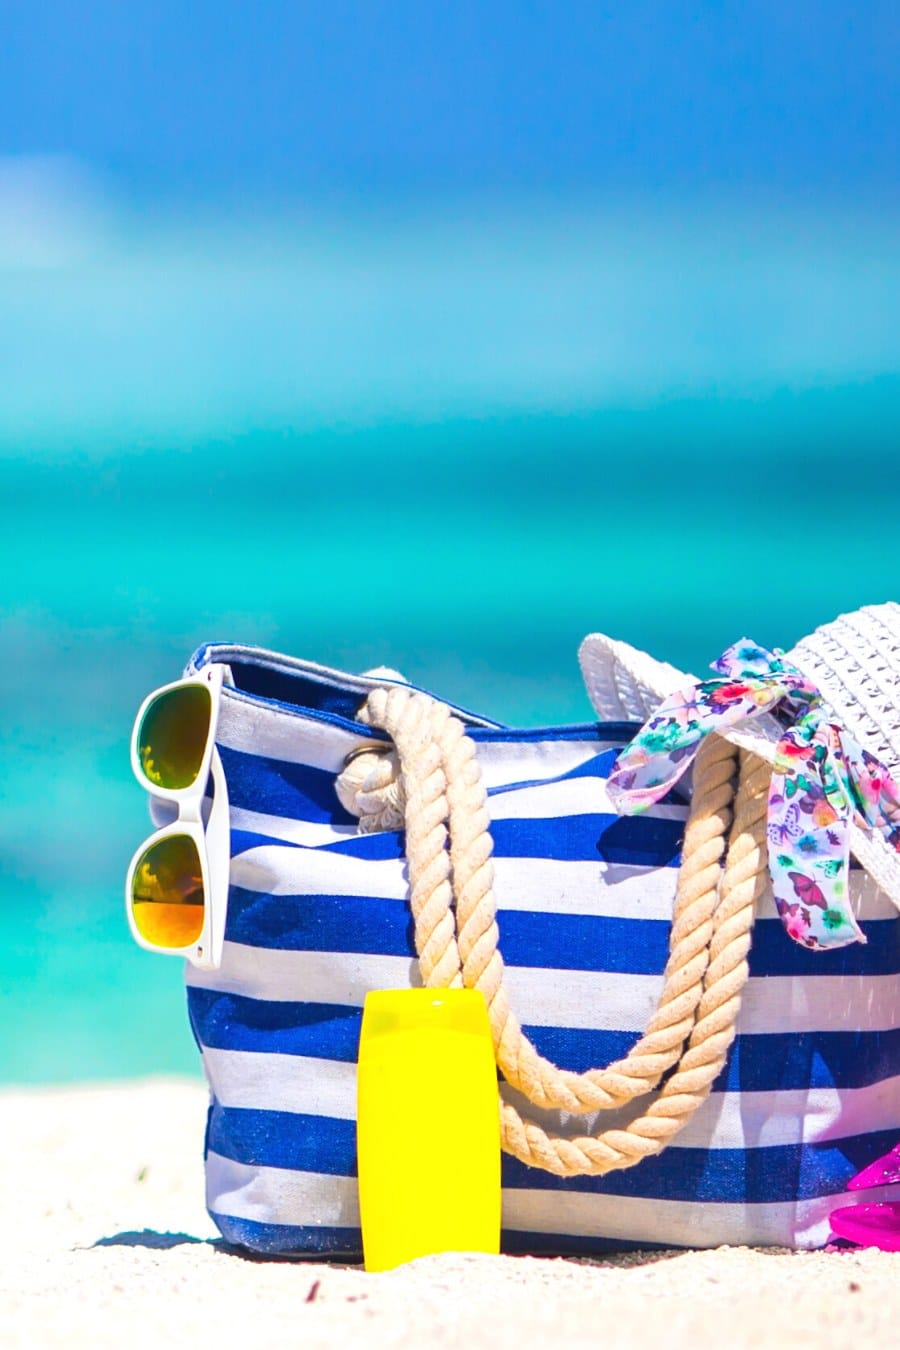 blue and white striped beach bag with sunglasses, sunblock and a hat sitting on sandy beach